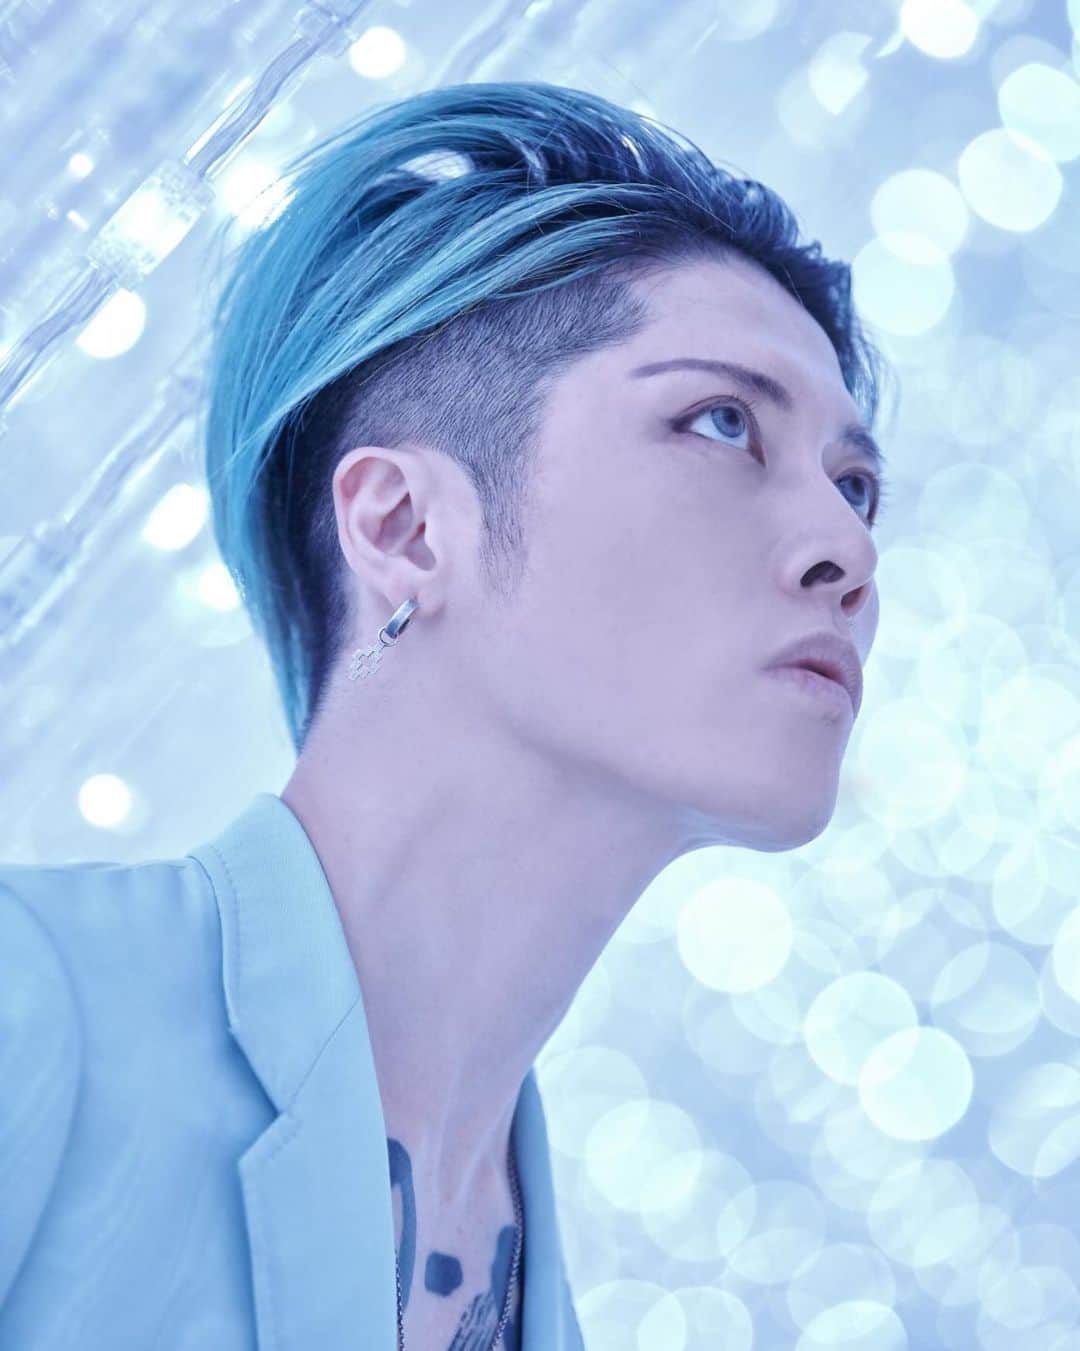 MIYAVI（石原貴雅）さんのインスタグラム写真 - (MIYAVI（石原貴雅）Instagram)「. 8/28(金)20:30配信 MIYAVI Virtual LIVE - Level 3.0🔥 . 進化系バーチャルライヴ「Virtual LIVE - Level 3.0」🎸🔥 ついに本日20:30から配信スタート‼️🙌 . インタラクティブな進化系配信ライブをお見逃しなく👀✨ . ご視聴はこちら↓ https://thumva.com/events/cSc3kNzwC95WNzZ ※Thumvaでの独占有料配信となります。 ※ライブ配信後もアーカイブ配信として映像をお楽しみいただけます。 . チケットはこちら↓ https://ticket.deli-a.jp/reserve_detail.php?Tour_ID=1540&Tour_Code=2d8b4634ce952711c0d88110d94acdbd . ＜一般チケット＞ 料金：￥3,300(税込) 販売期間：～8/30(日)21:30 . ---------- . 海外からのご視聴はこちら↓ https://live.miyavi.com *放送時間が変わります。 詳細は下記英語でのご案内を参照してください。 . (For fans outside of Japan) . Next MIYAVI Virtual 3.0 at teamLab Planets TOKYO will be streamed on August 28, 2020 at 3PM (Los Angeles) /6PM (New York time) 11PM (UK). Tickets to watch this special performance can be purchased at https://live.miyavi.com. Tag a friend in the comments and we will be giving away free access codes to watch the concert. Prizes will be given out in real-time during the stream. You don’t wanna miss this show! . ---------- . #MIYAVI #LDH #MYVCREW #MIYAVIVirtual #VirtualLIVE #teamLab #teamLabPlanetsTOKYO . @teamlab.planets」8月28日 17時12分 - miyavi_staff